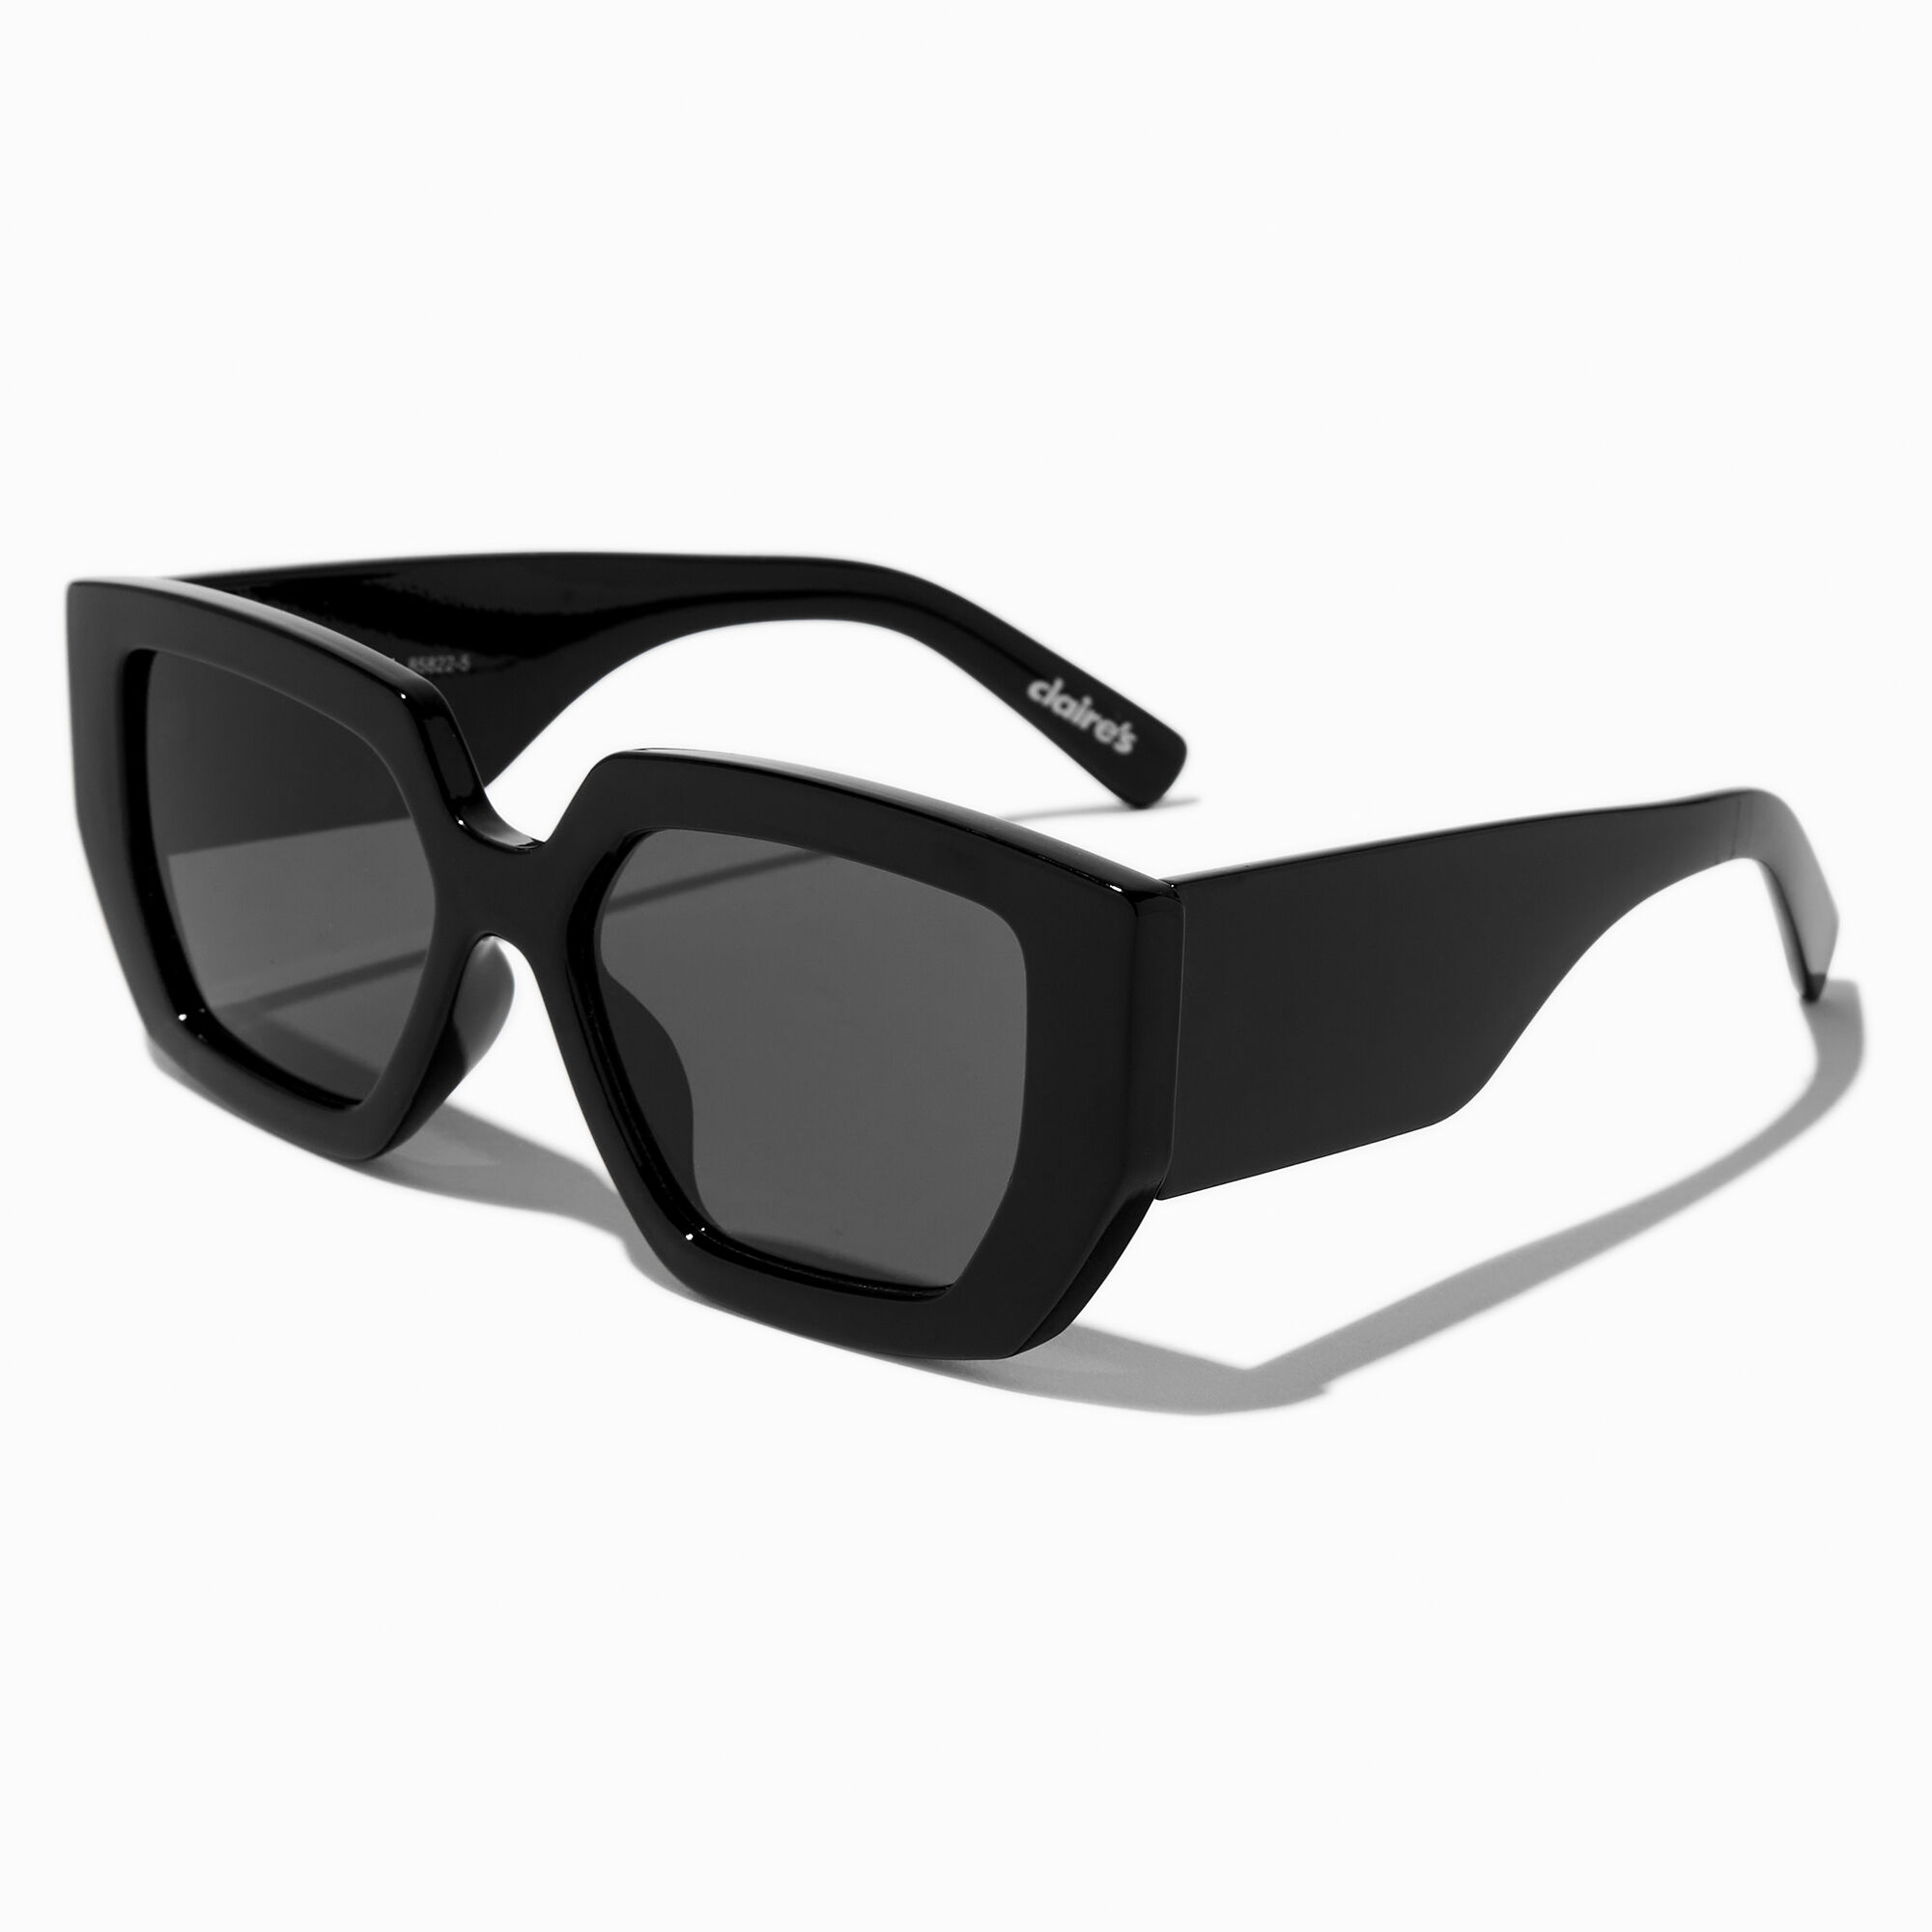 View Claires Chunky Geometric Sunglasses Black information